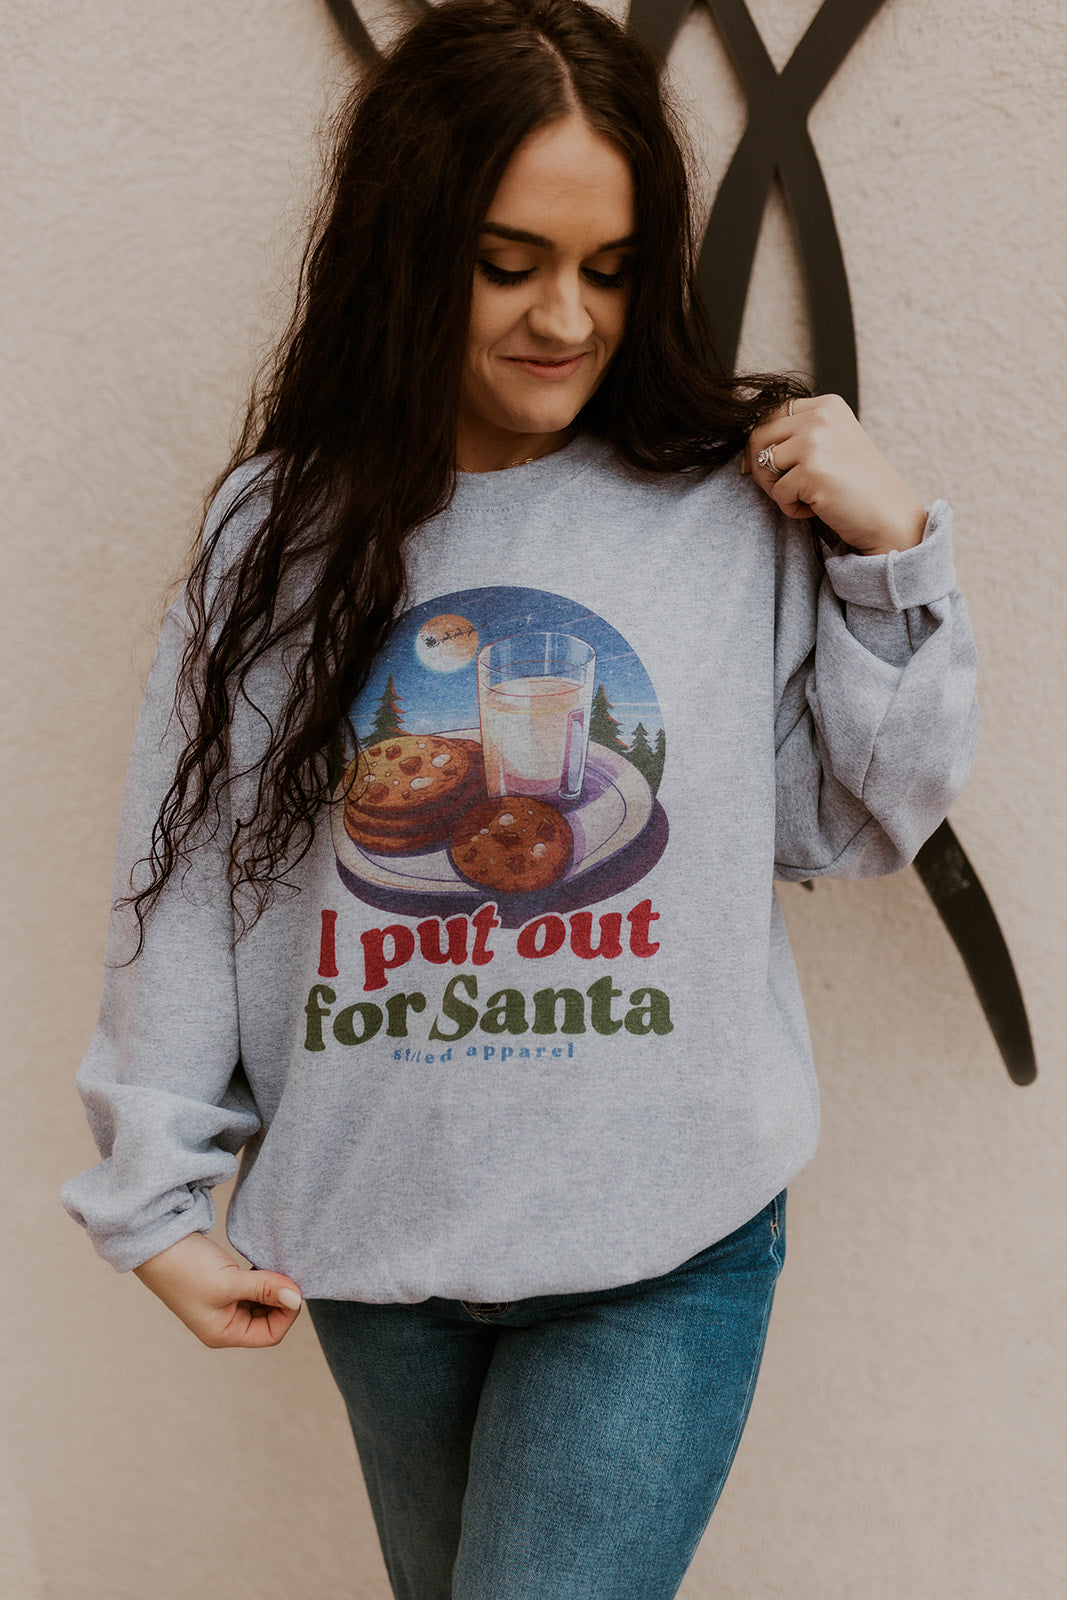 Christmas Sweatshirt that says "I Put Out for Santa" with picture of Milk and Cookies